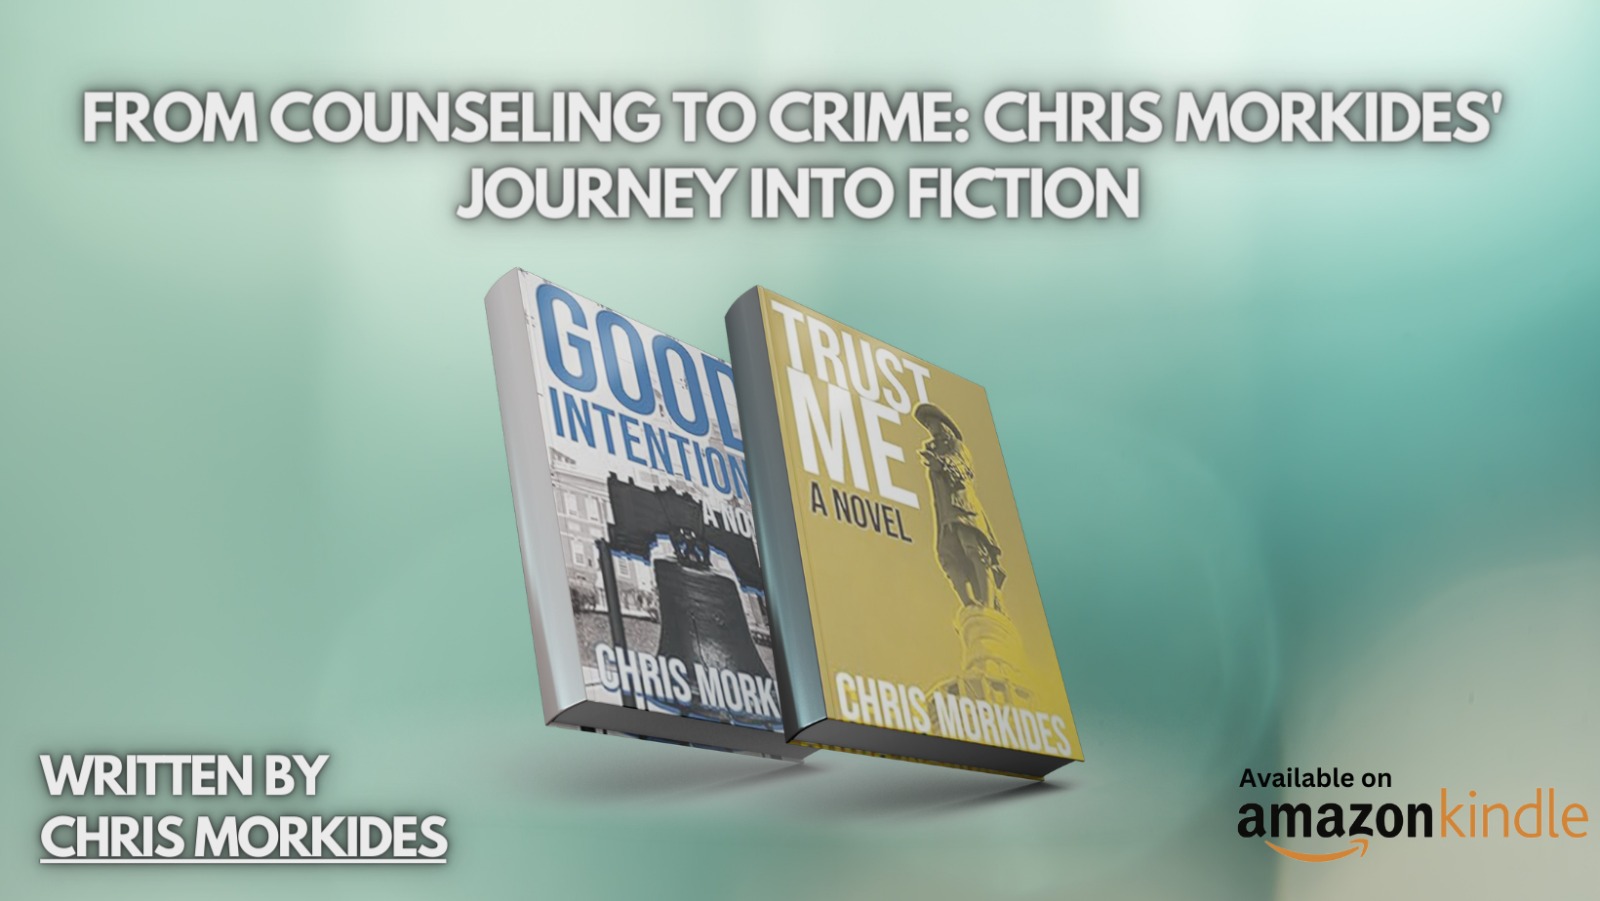 From Counseling to Crime: Chris Morkides' Journey into Fiction